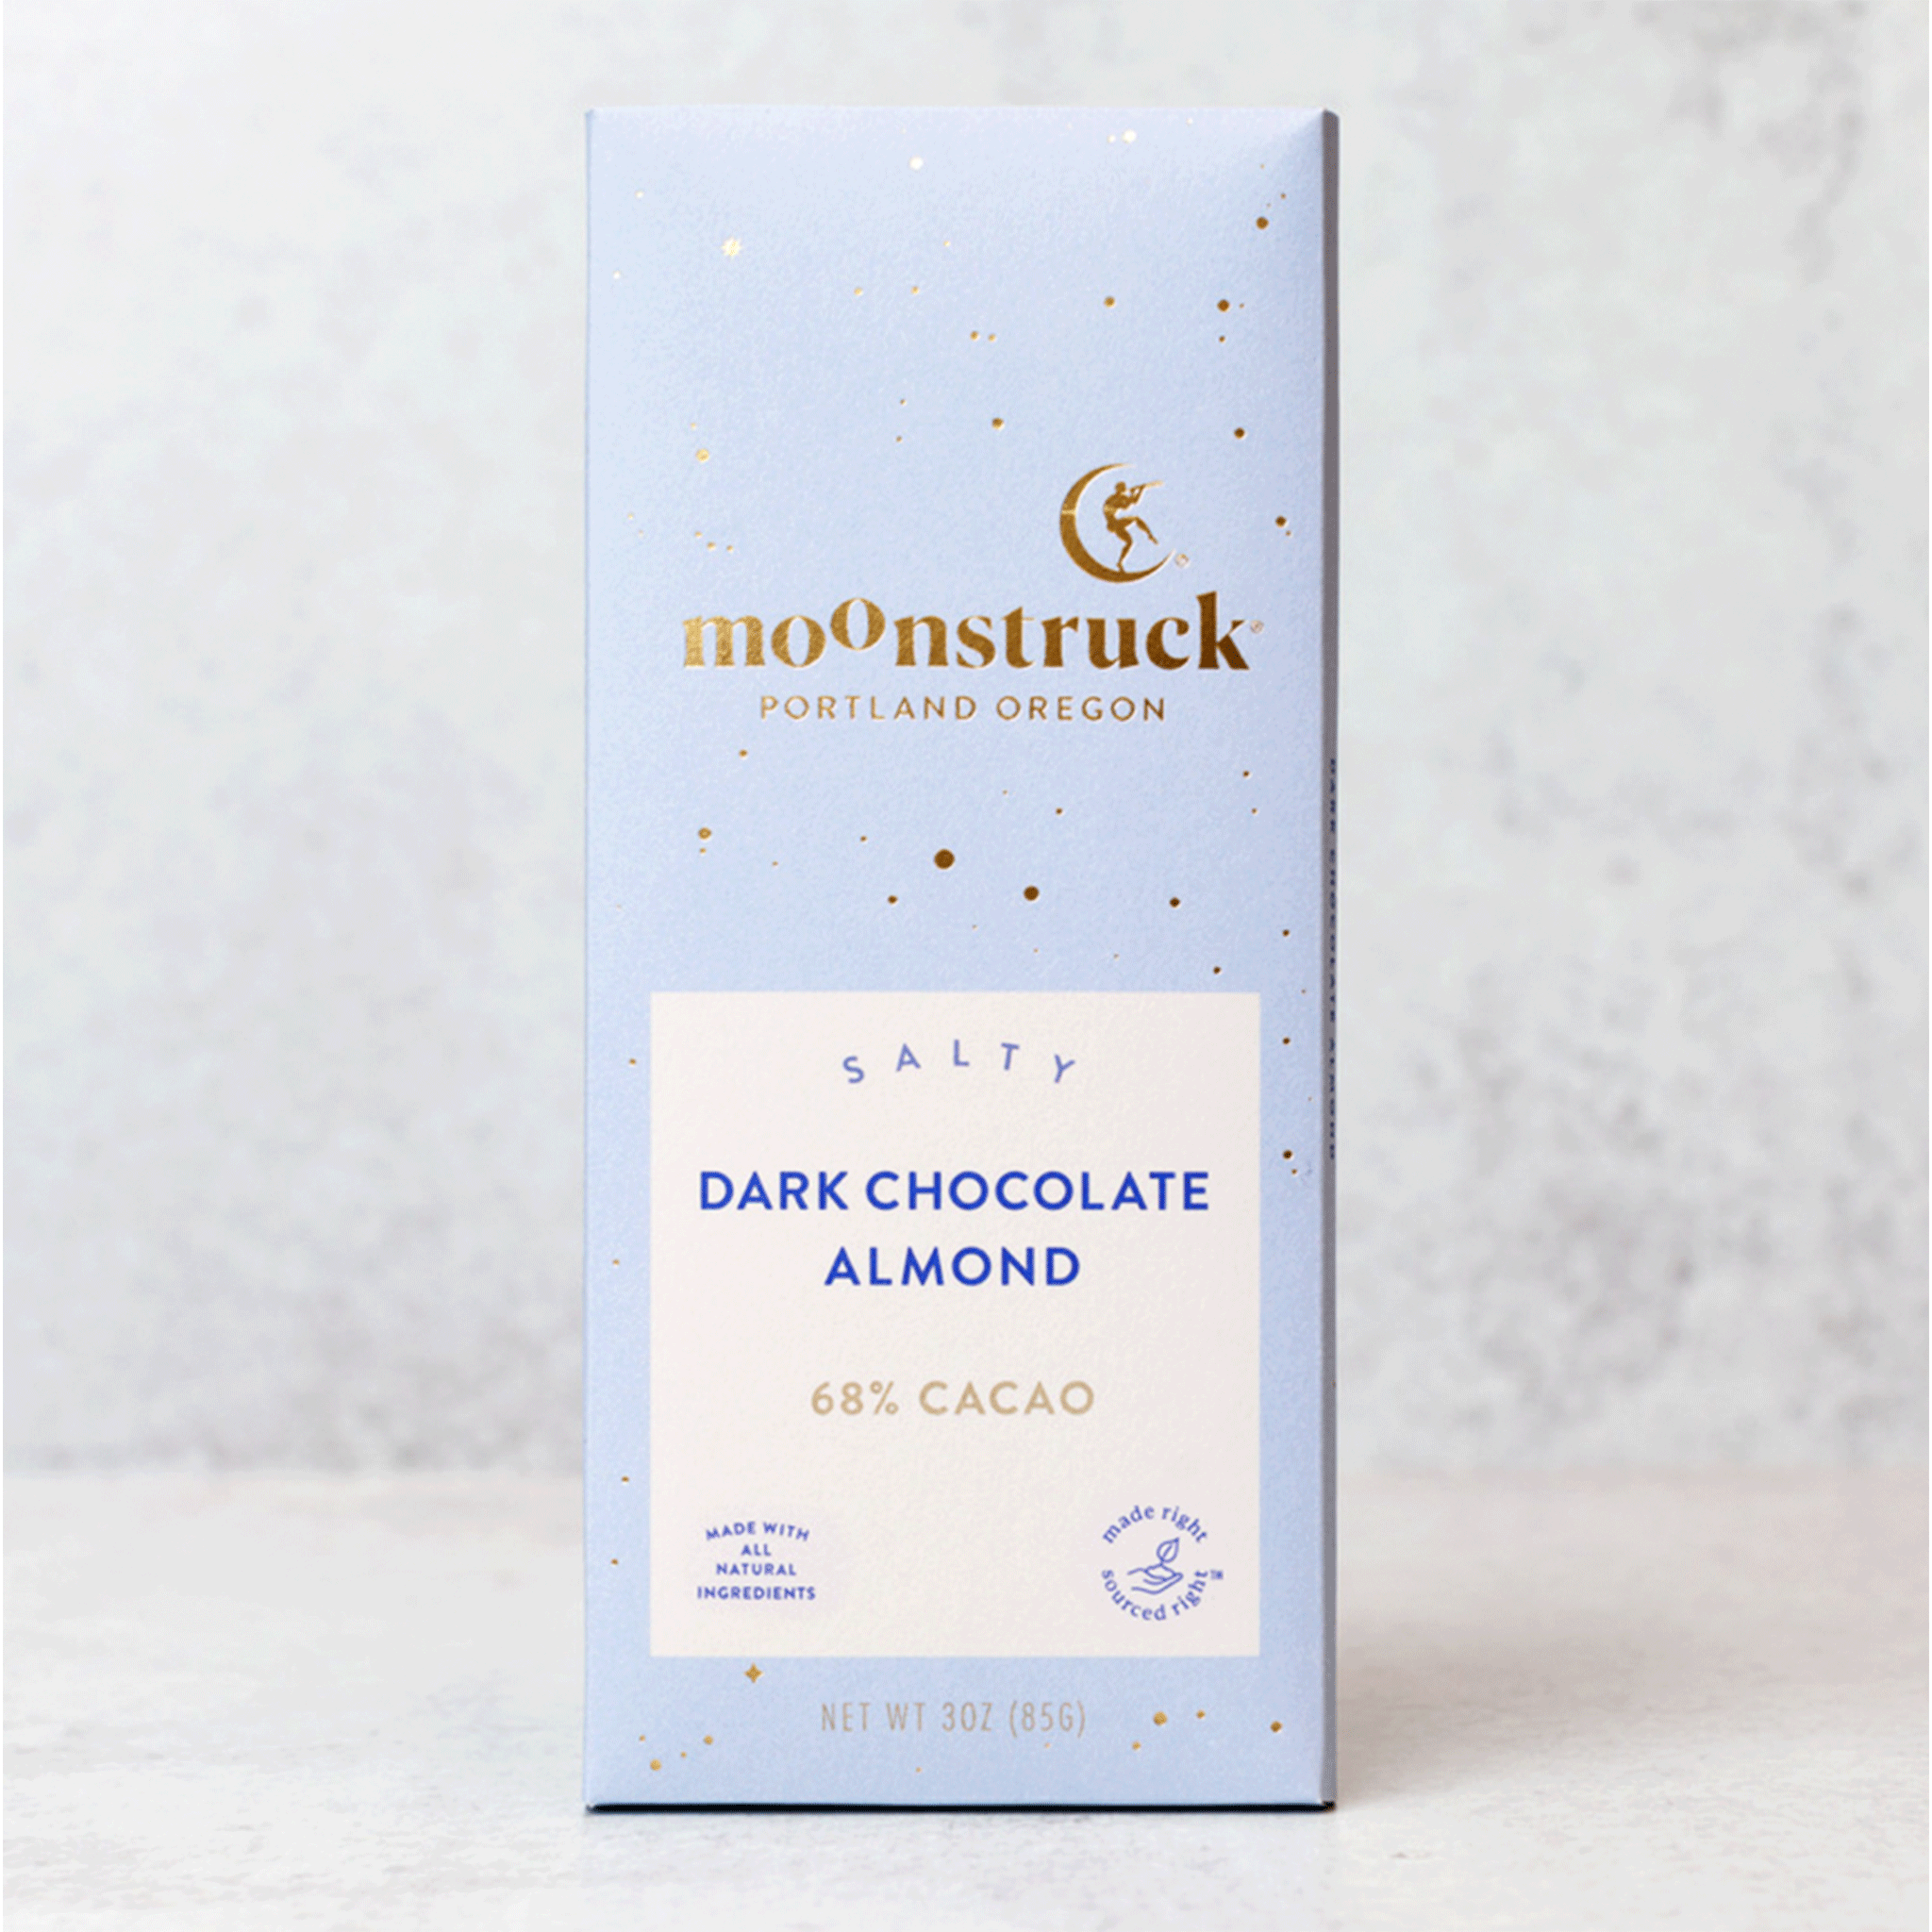 On a grey background is a light blue packaged chocolate bar with gold details and text that reads, &quot;moonstruck Portland Oregon&quot;, &quot;Salty Dark Chocolate Almond 68% Cacao&quot;.